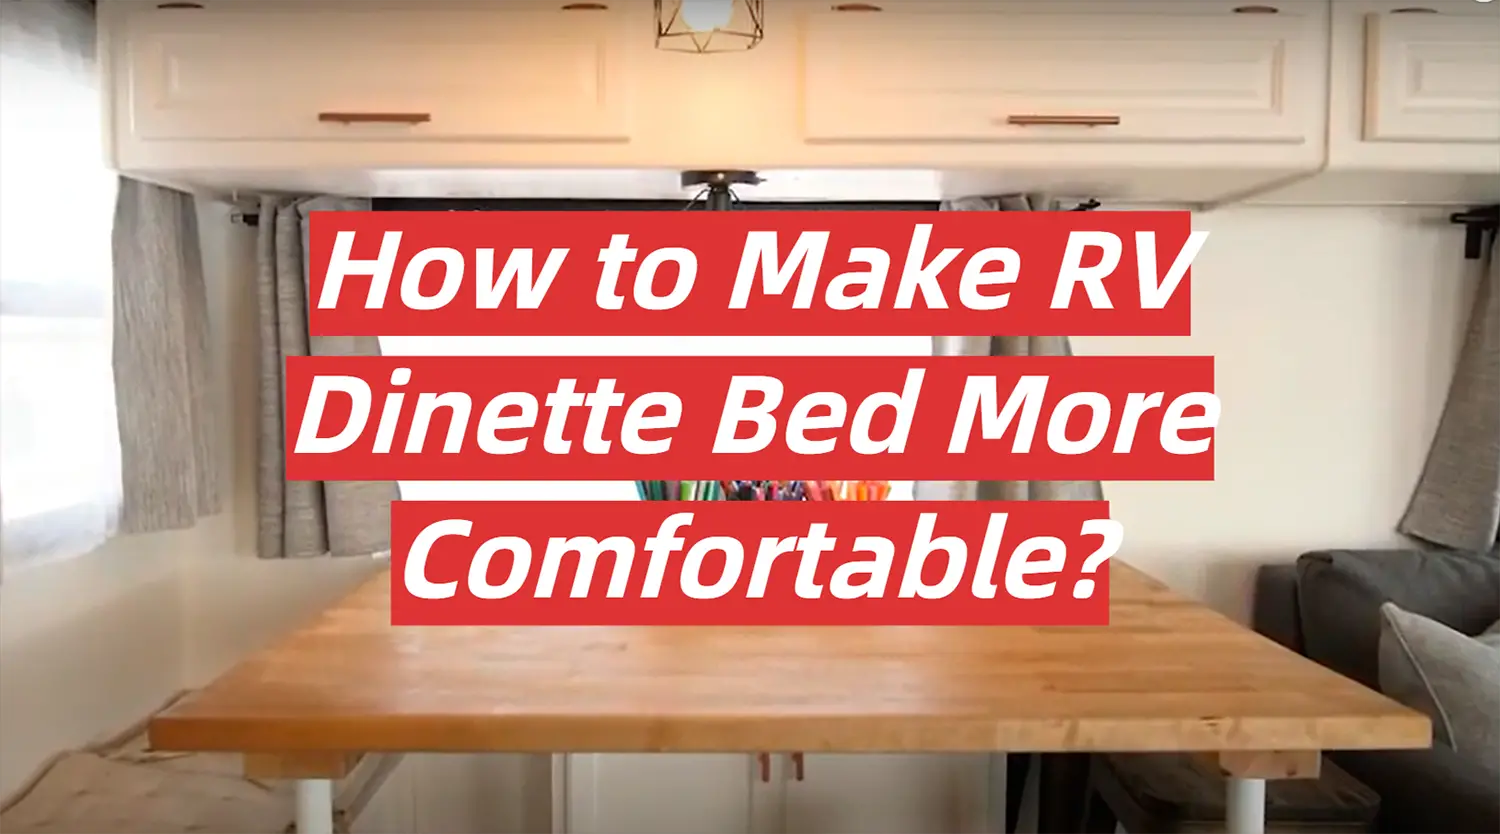 How to Make RV Dinette Bed More Comfortable?